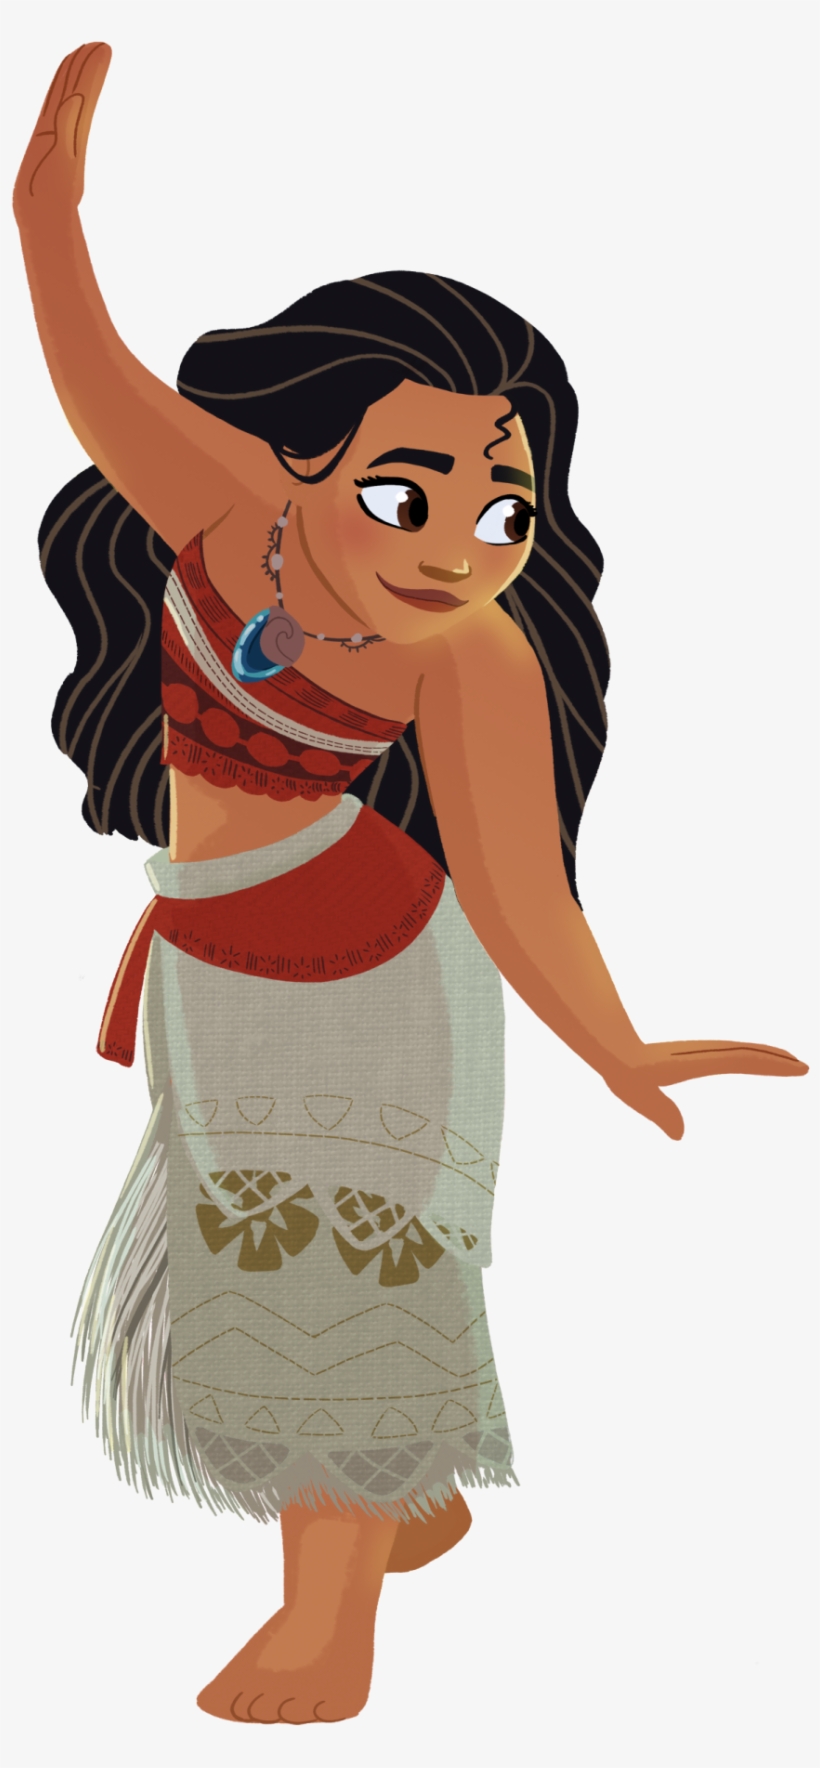 Mostly Elena Of Avalor Themed Art And Such The Bottom - Disney Princess, transparent png #5261001